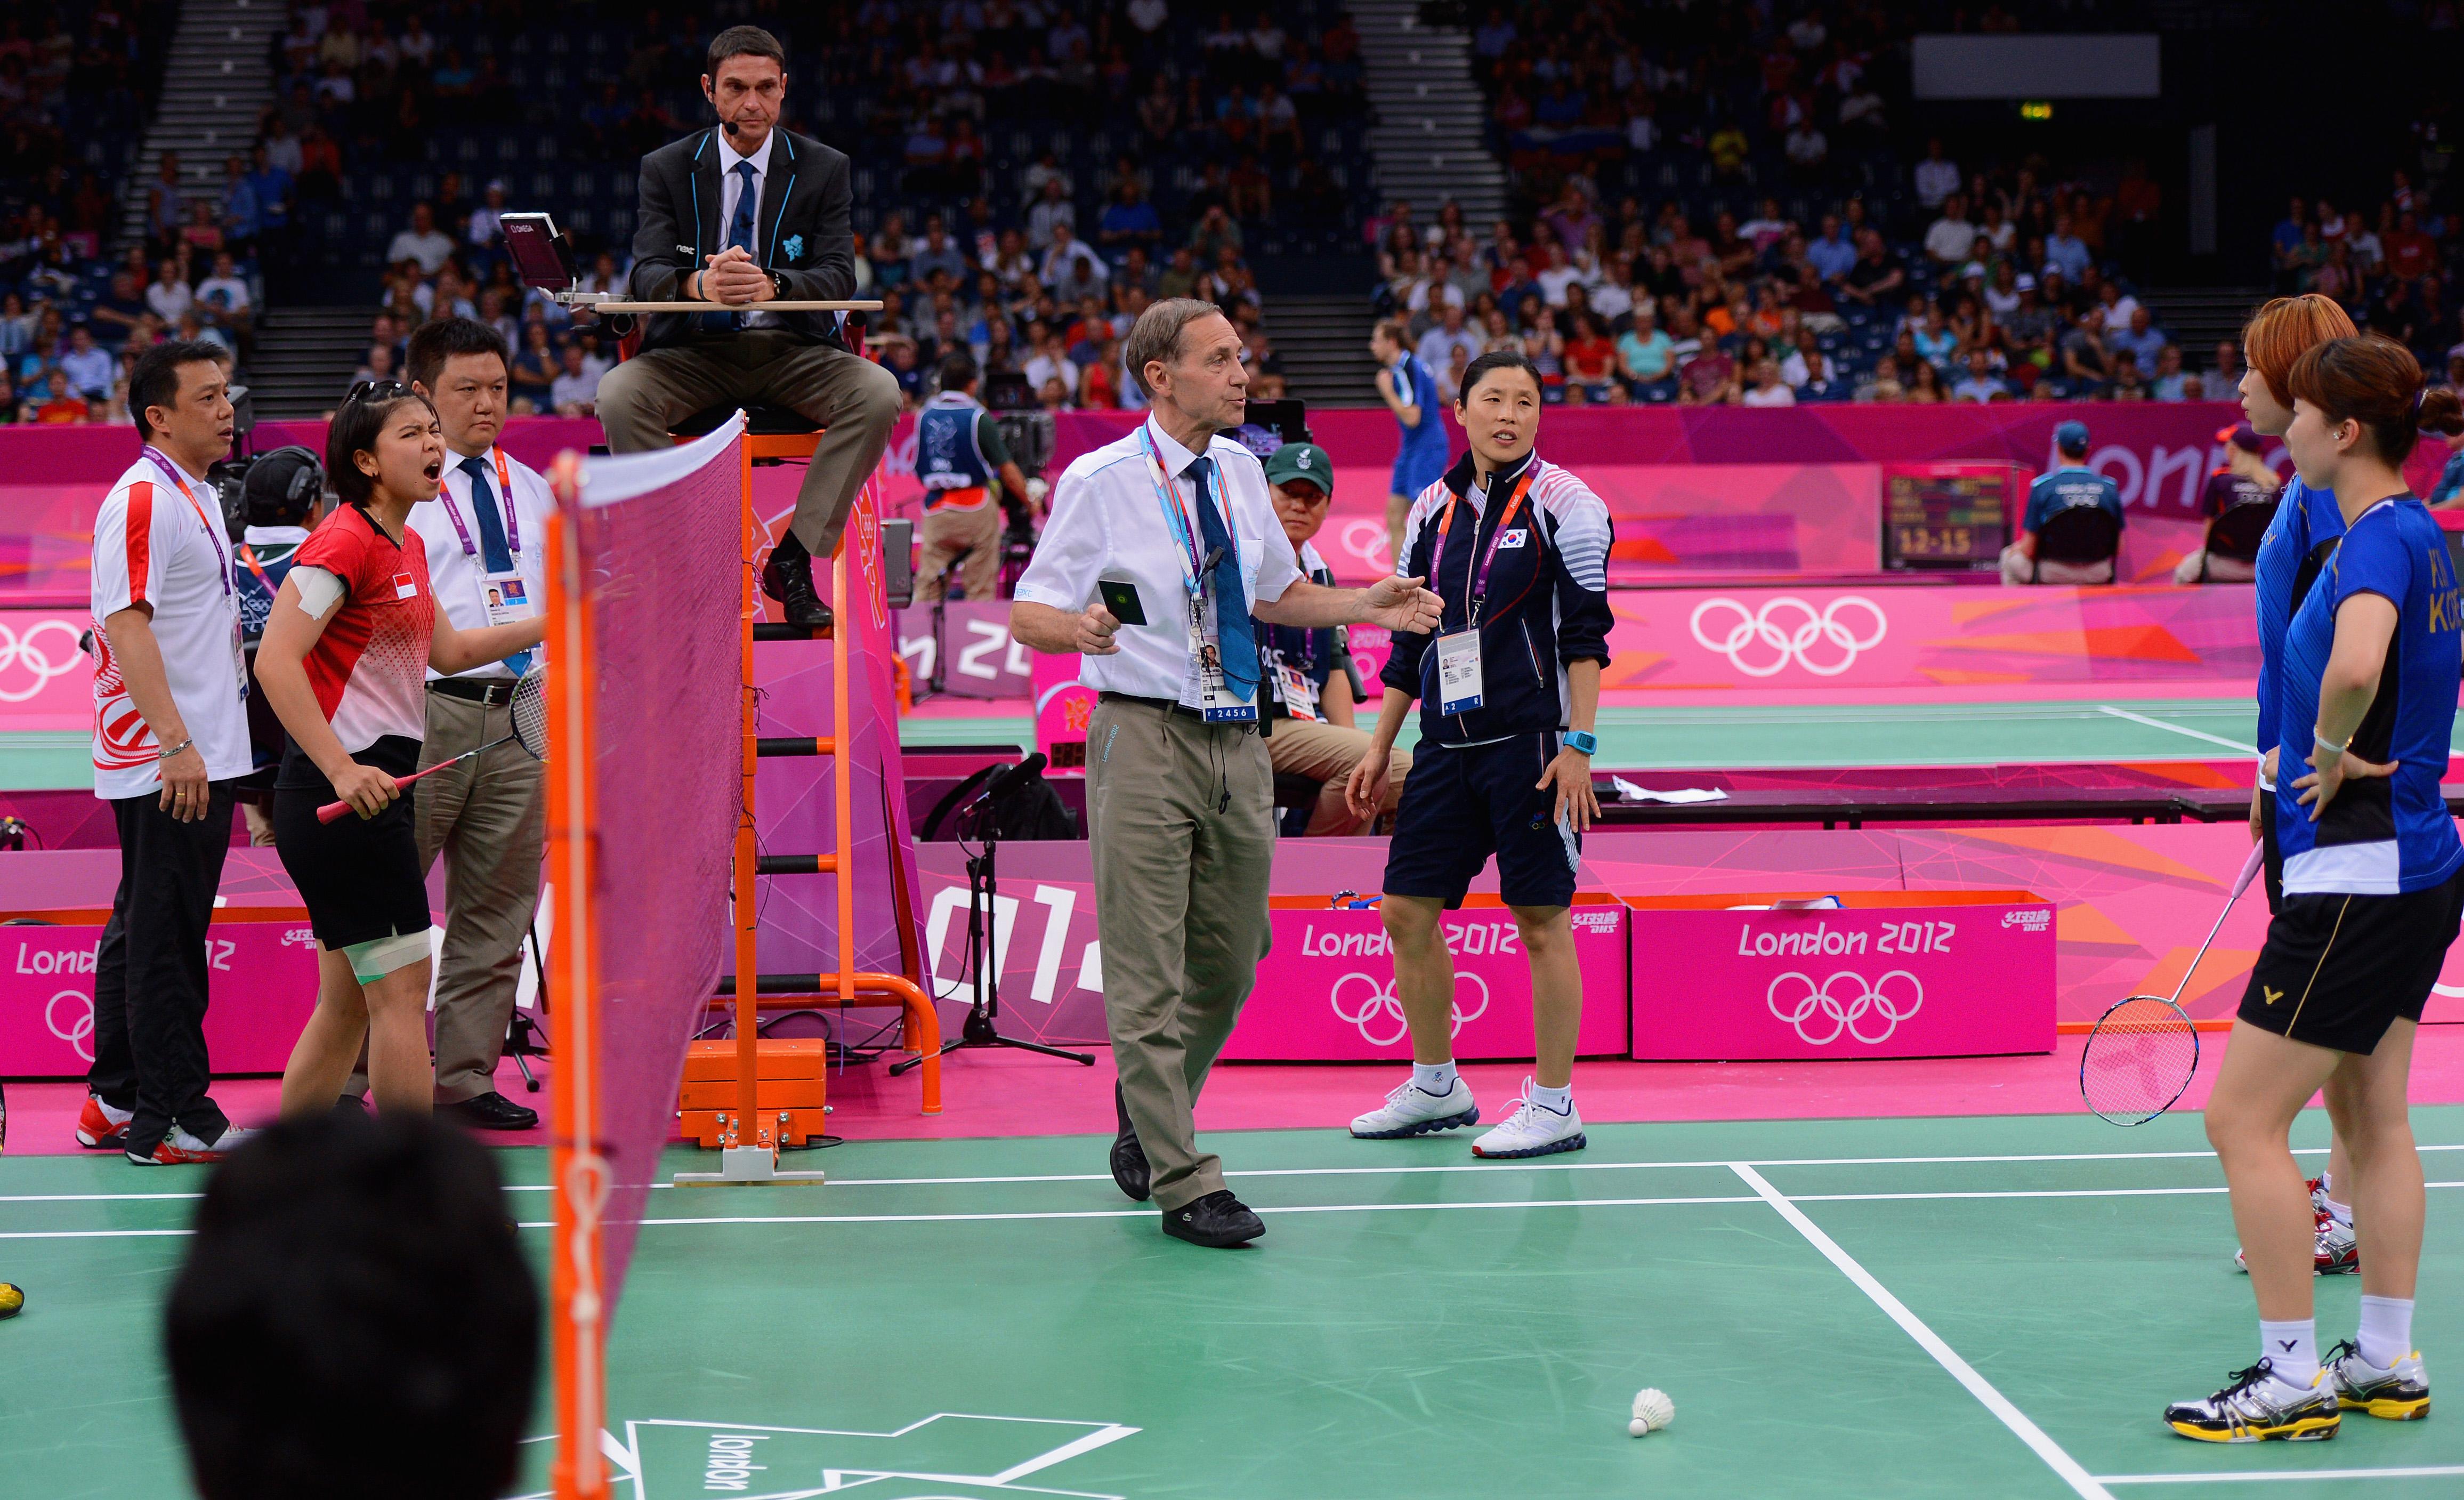 Badminton scandal, Olympics 2012 Why were those Olympic badminton players trying to lose? And why is the sport so dirty?